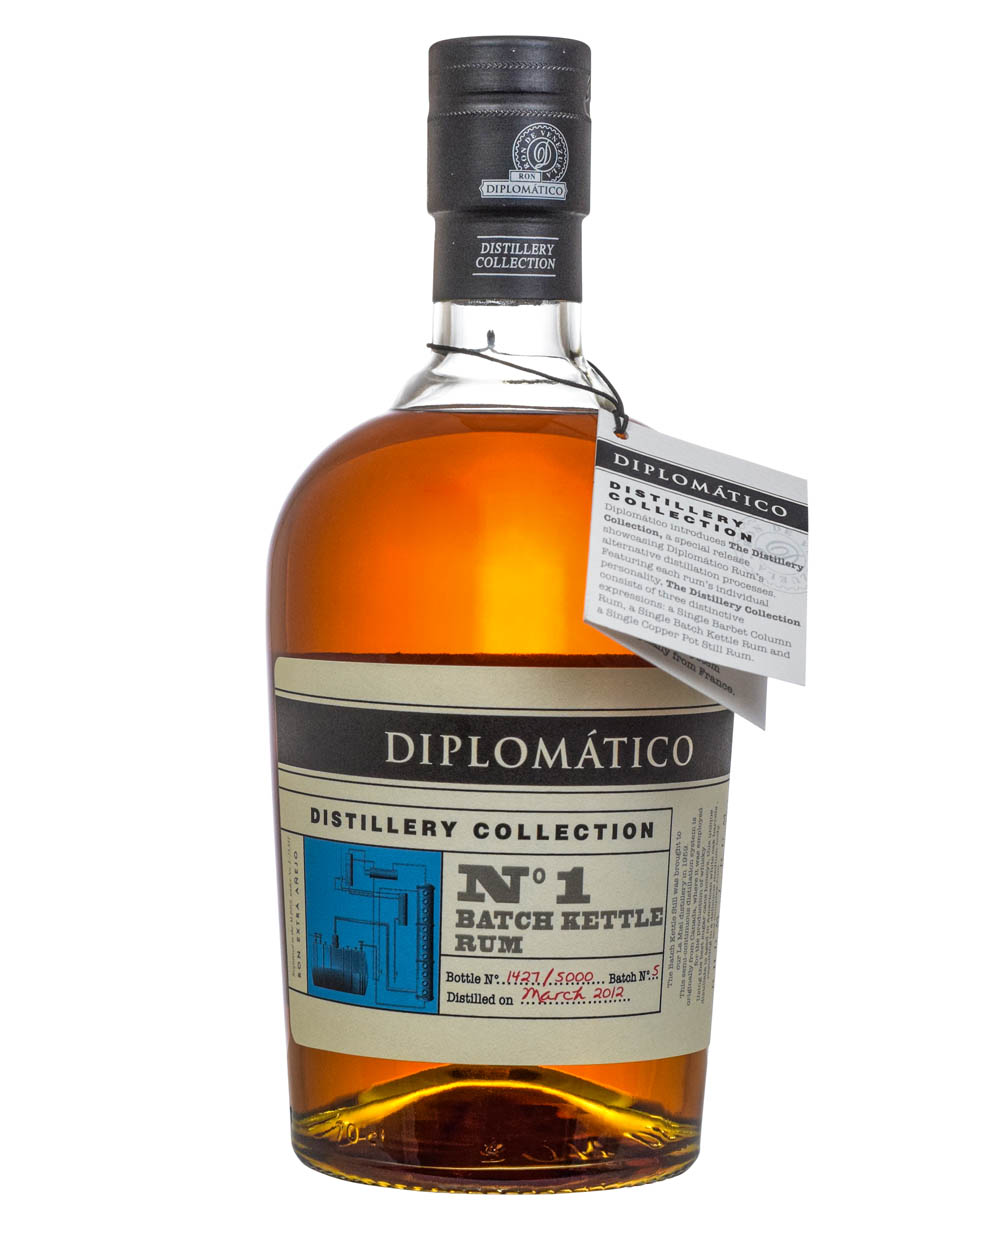 Diplomatico Distillery Collection No1 Batch Kettle Rum Must Have Malts MHM